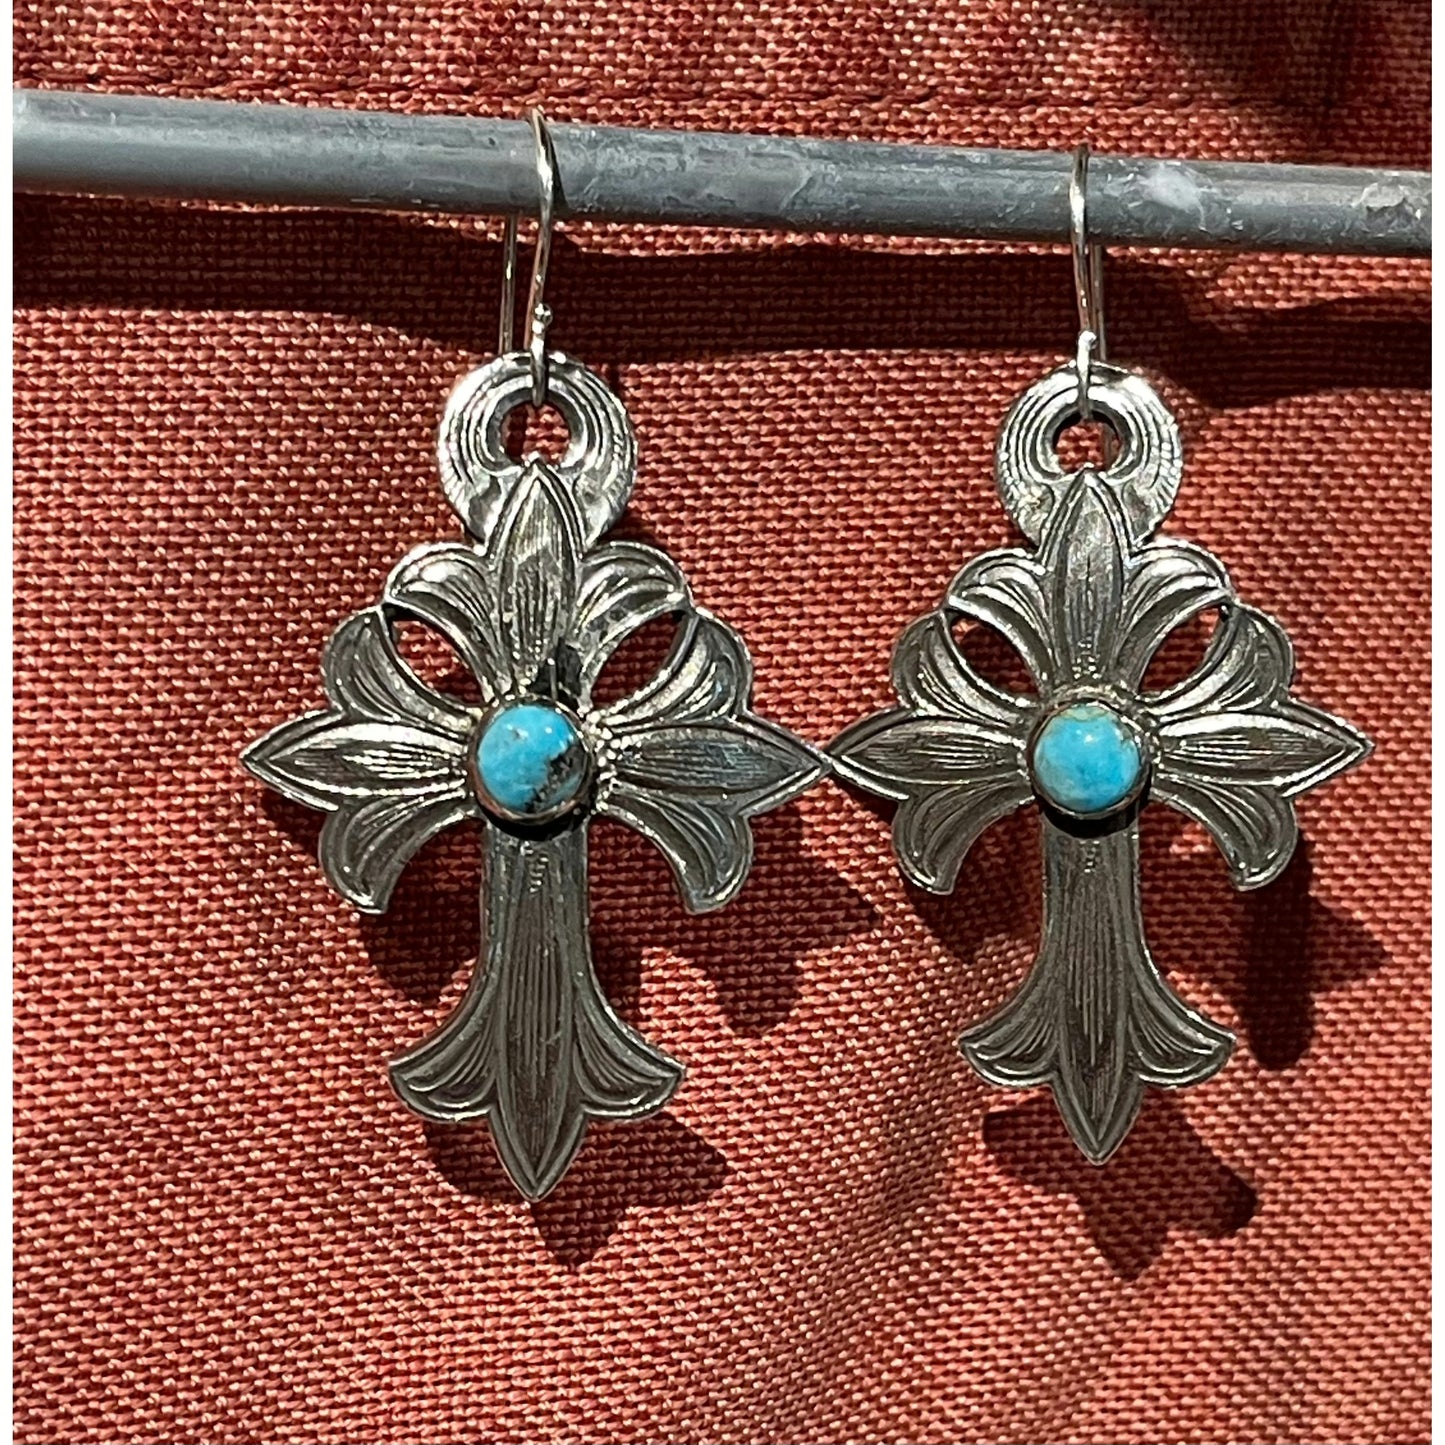 The "Mary" Cross Turquoise Earrings are handmade solid sterling silver dangle earrings that feature western style hand engraving and set with a genuine Kingman stone in the center of the cross. These earrings are 1 1/4" X 1 3/4".